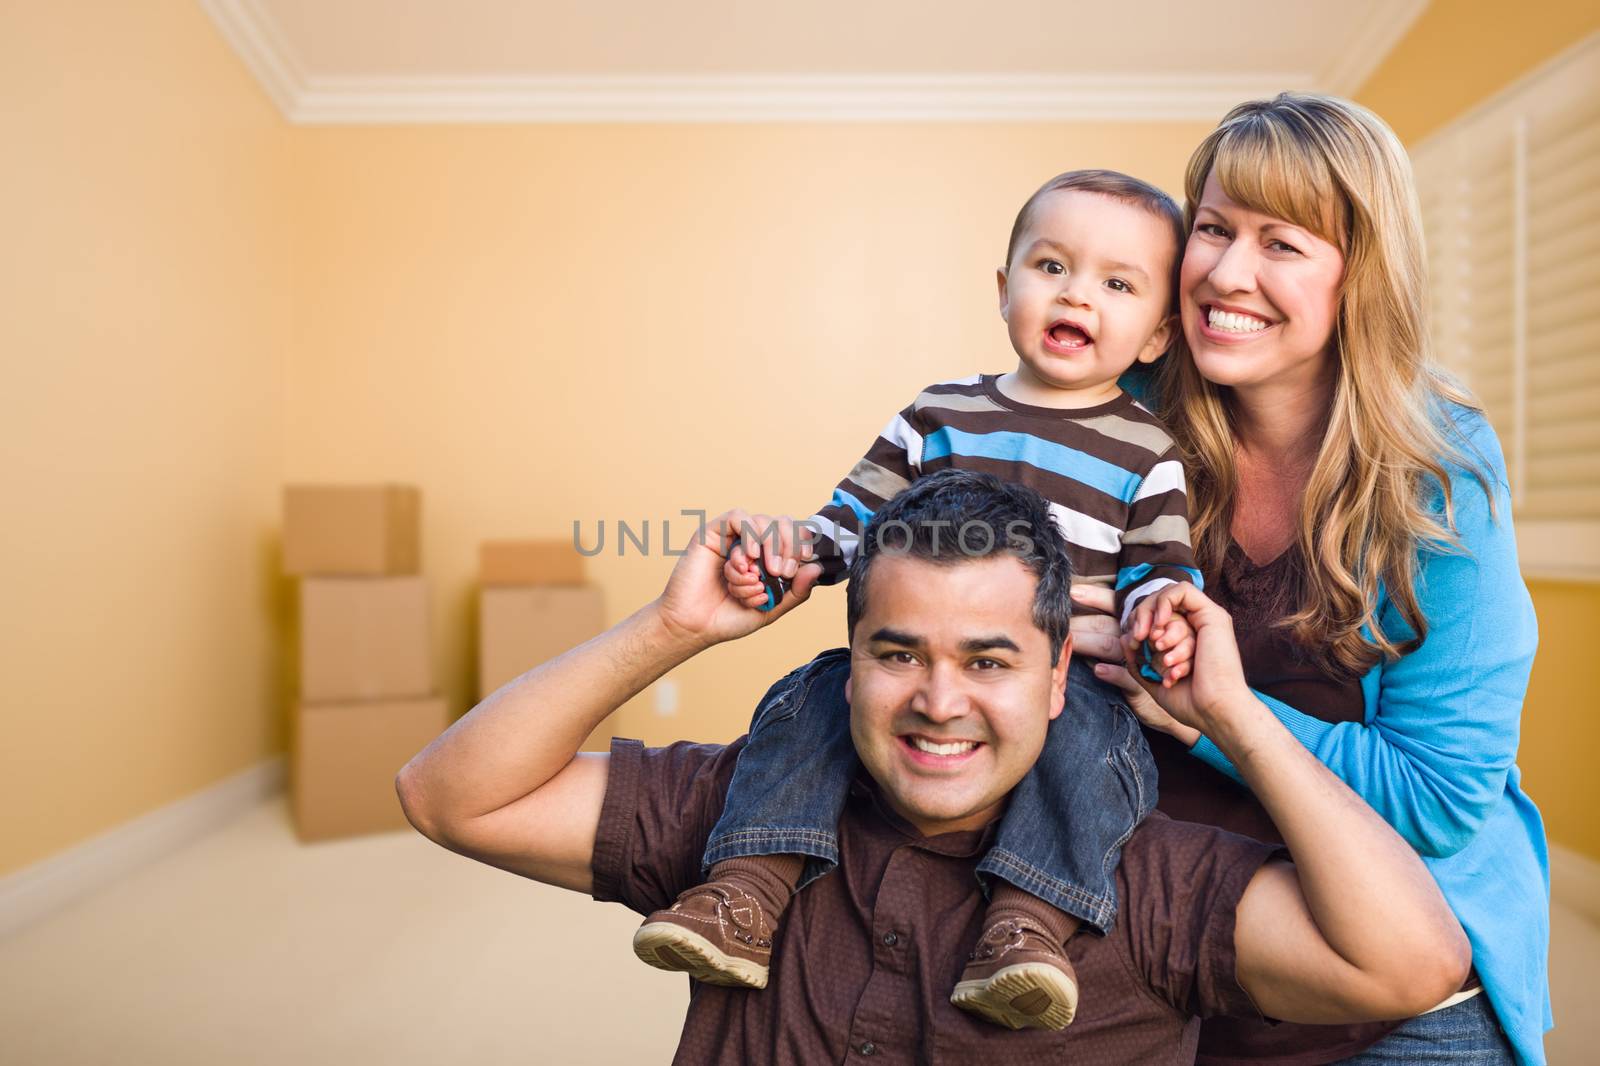 Young Mixed Race Family In Room With Moving Boxes by Feverpitched